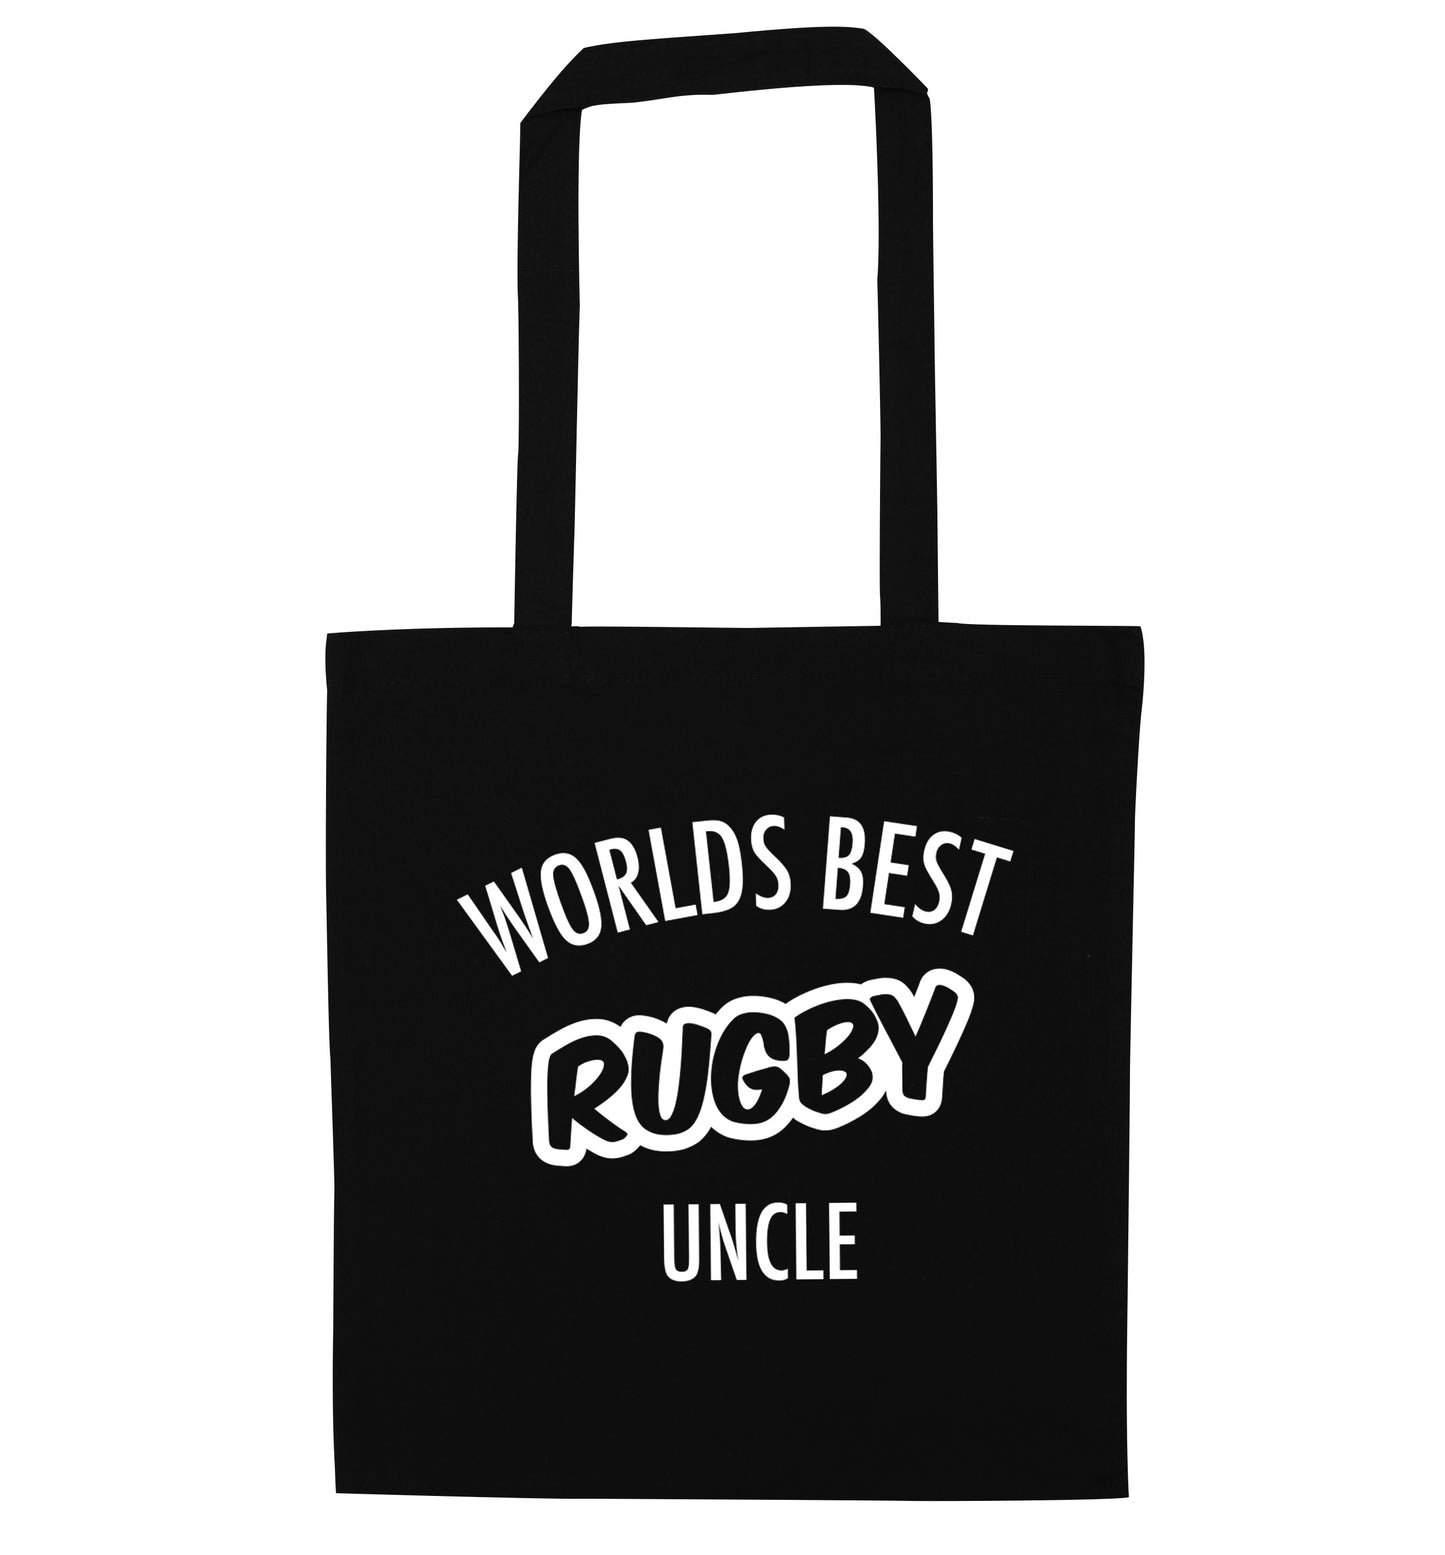 Worlds best rugby uncle black tote bag